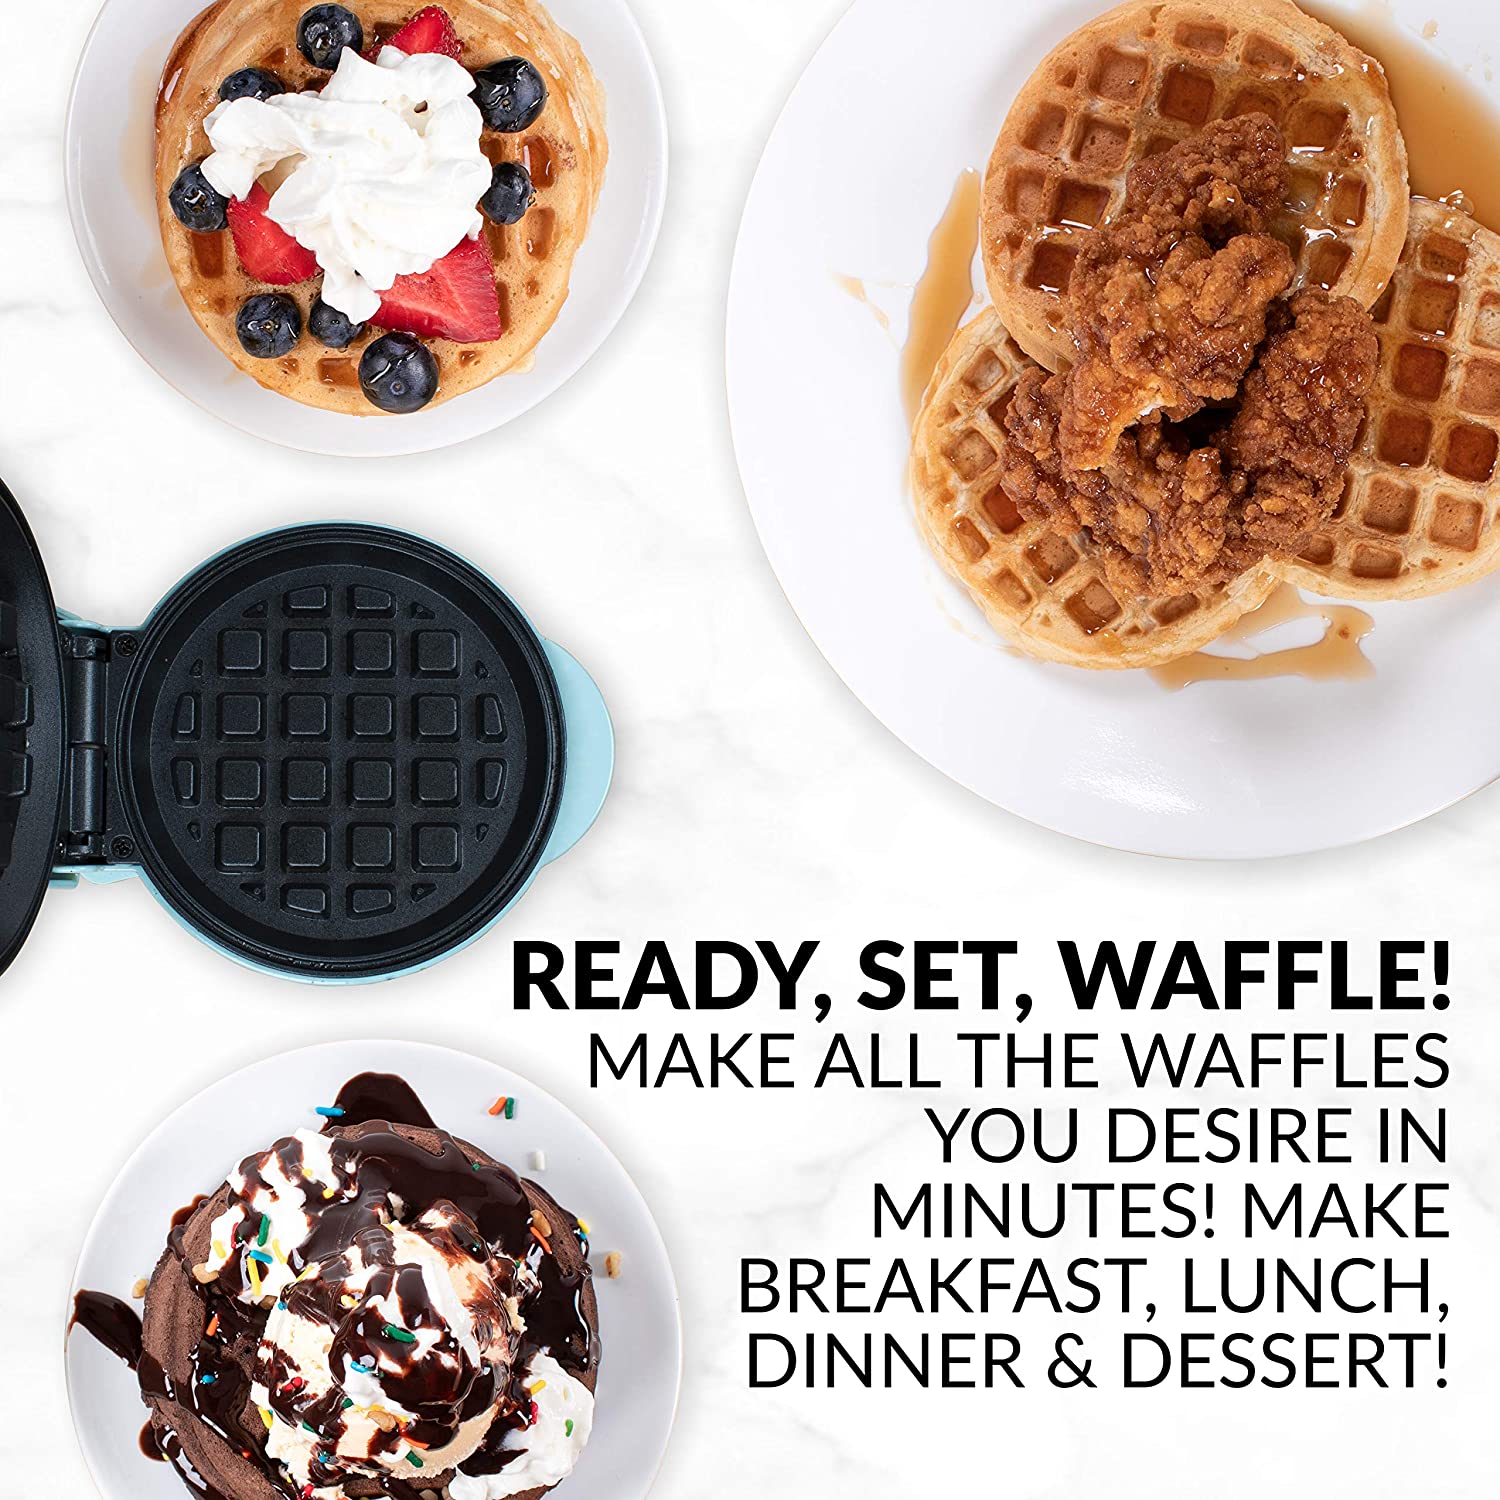 Nostalgia MyMini Personal Electric Waffle Maker Compact Size 5 inch Non-Stick for Kitchens, Campers and More